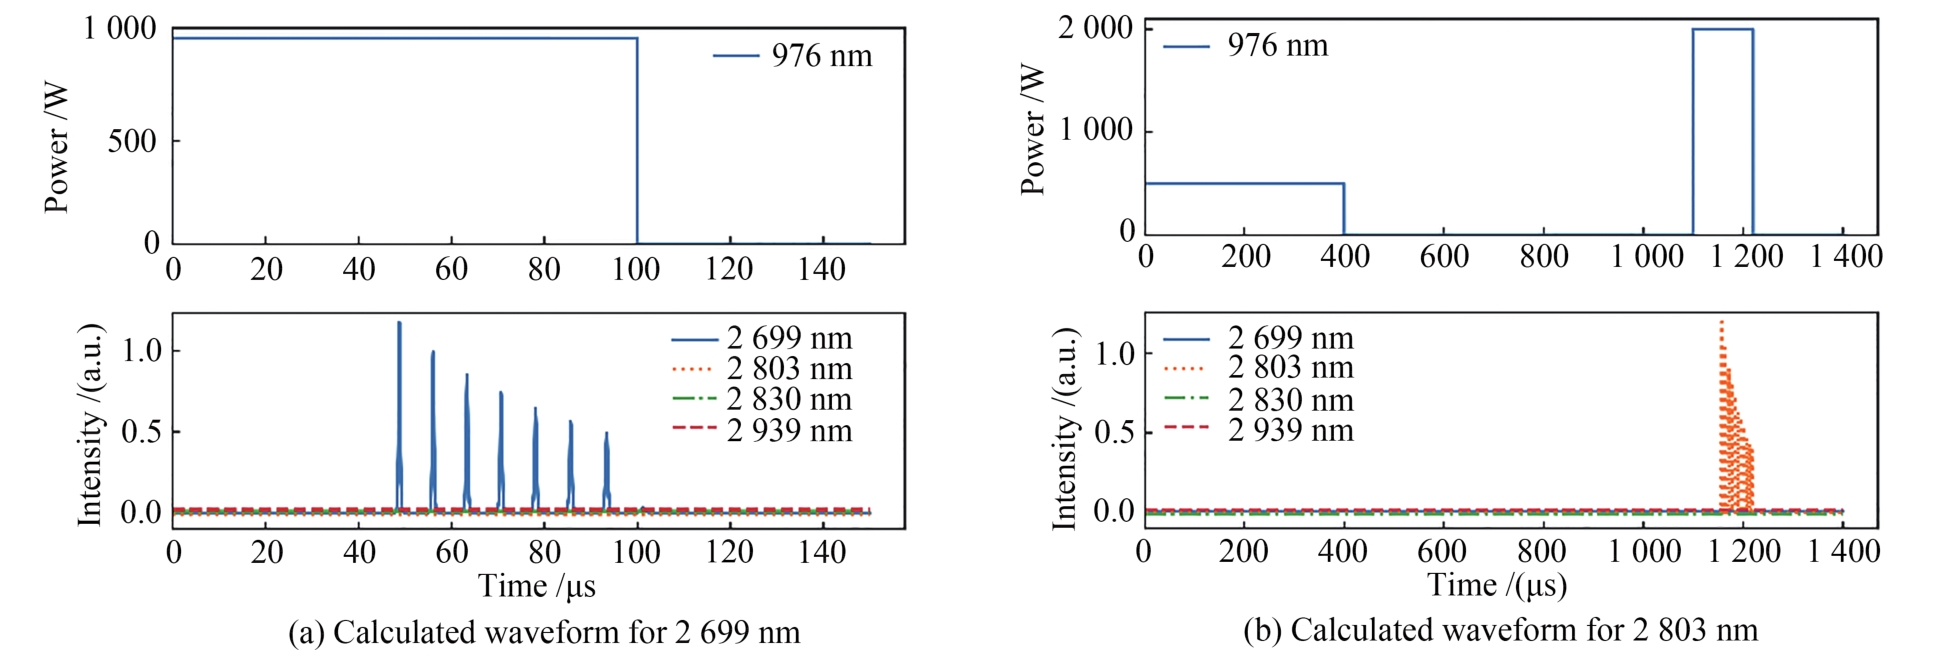 Single wavelength output theoretically calculated laser waveform under the pumping conditions